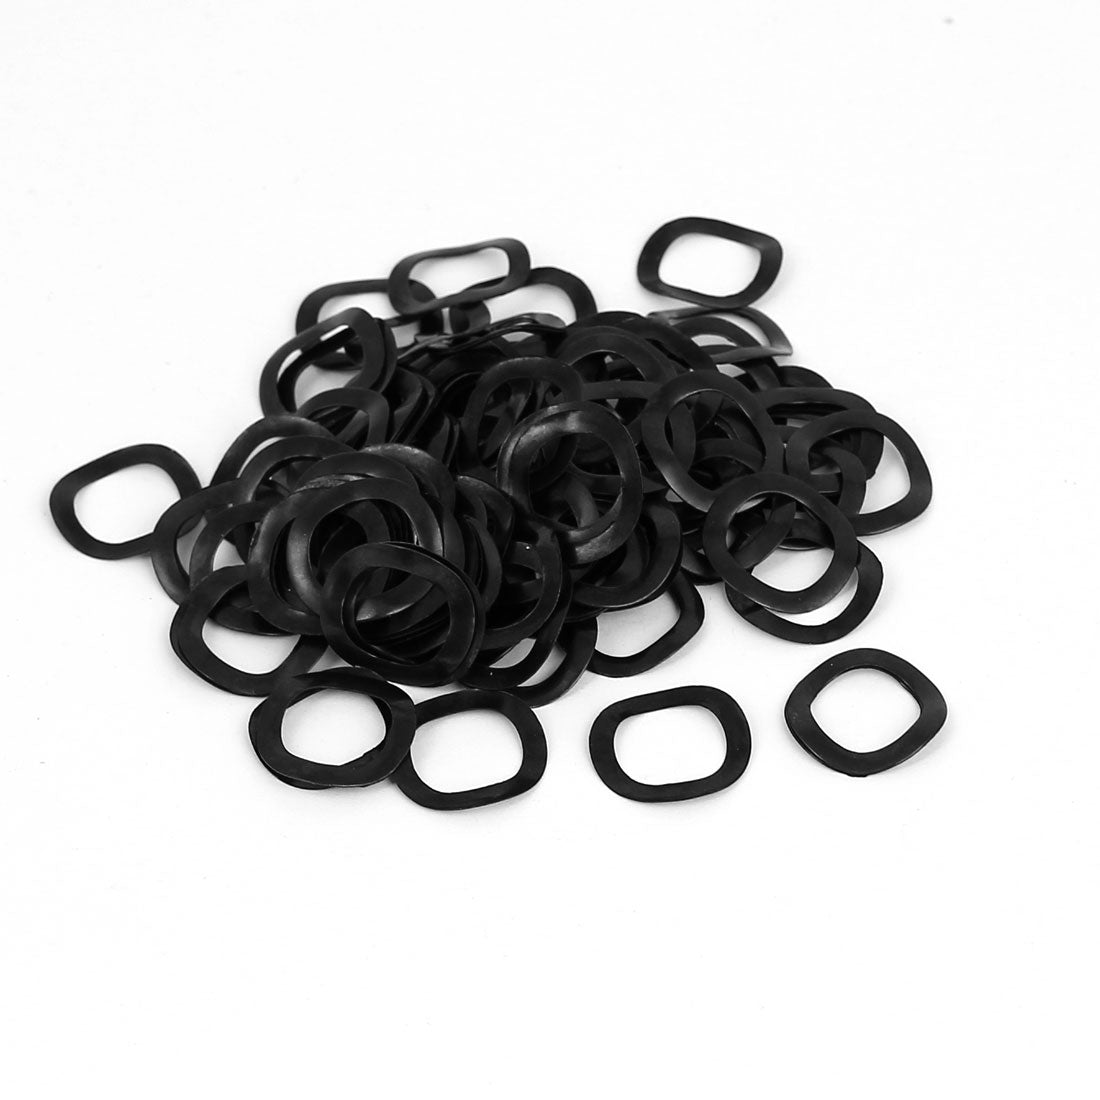 uxcell Uxcell 100pcs Black Metal Wavy Wave Crinkle Spring Washers 12mm x 18mm x 0.3mm